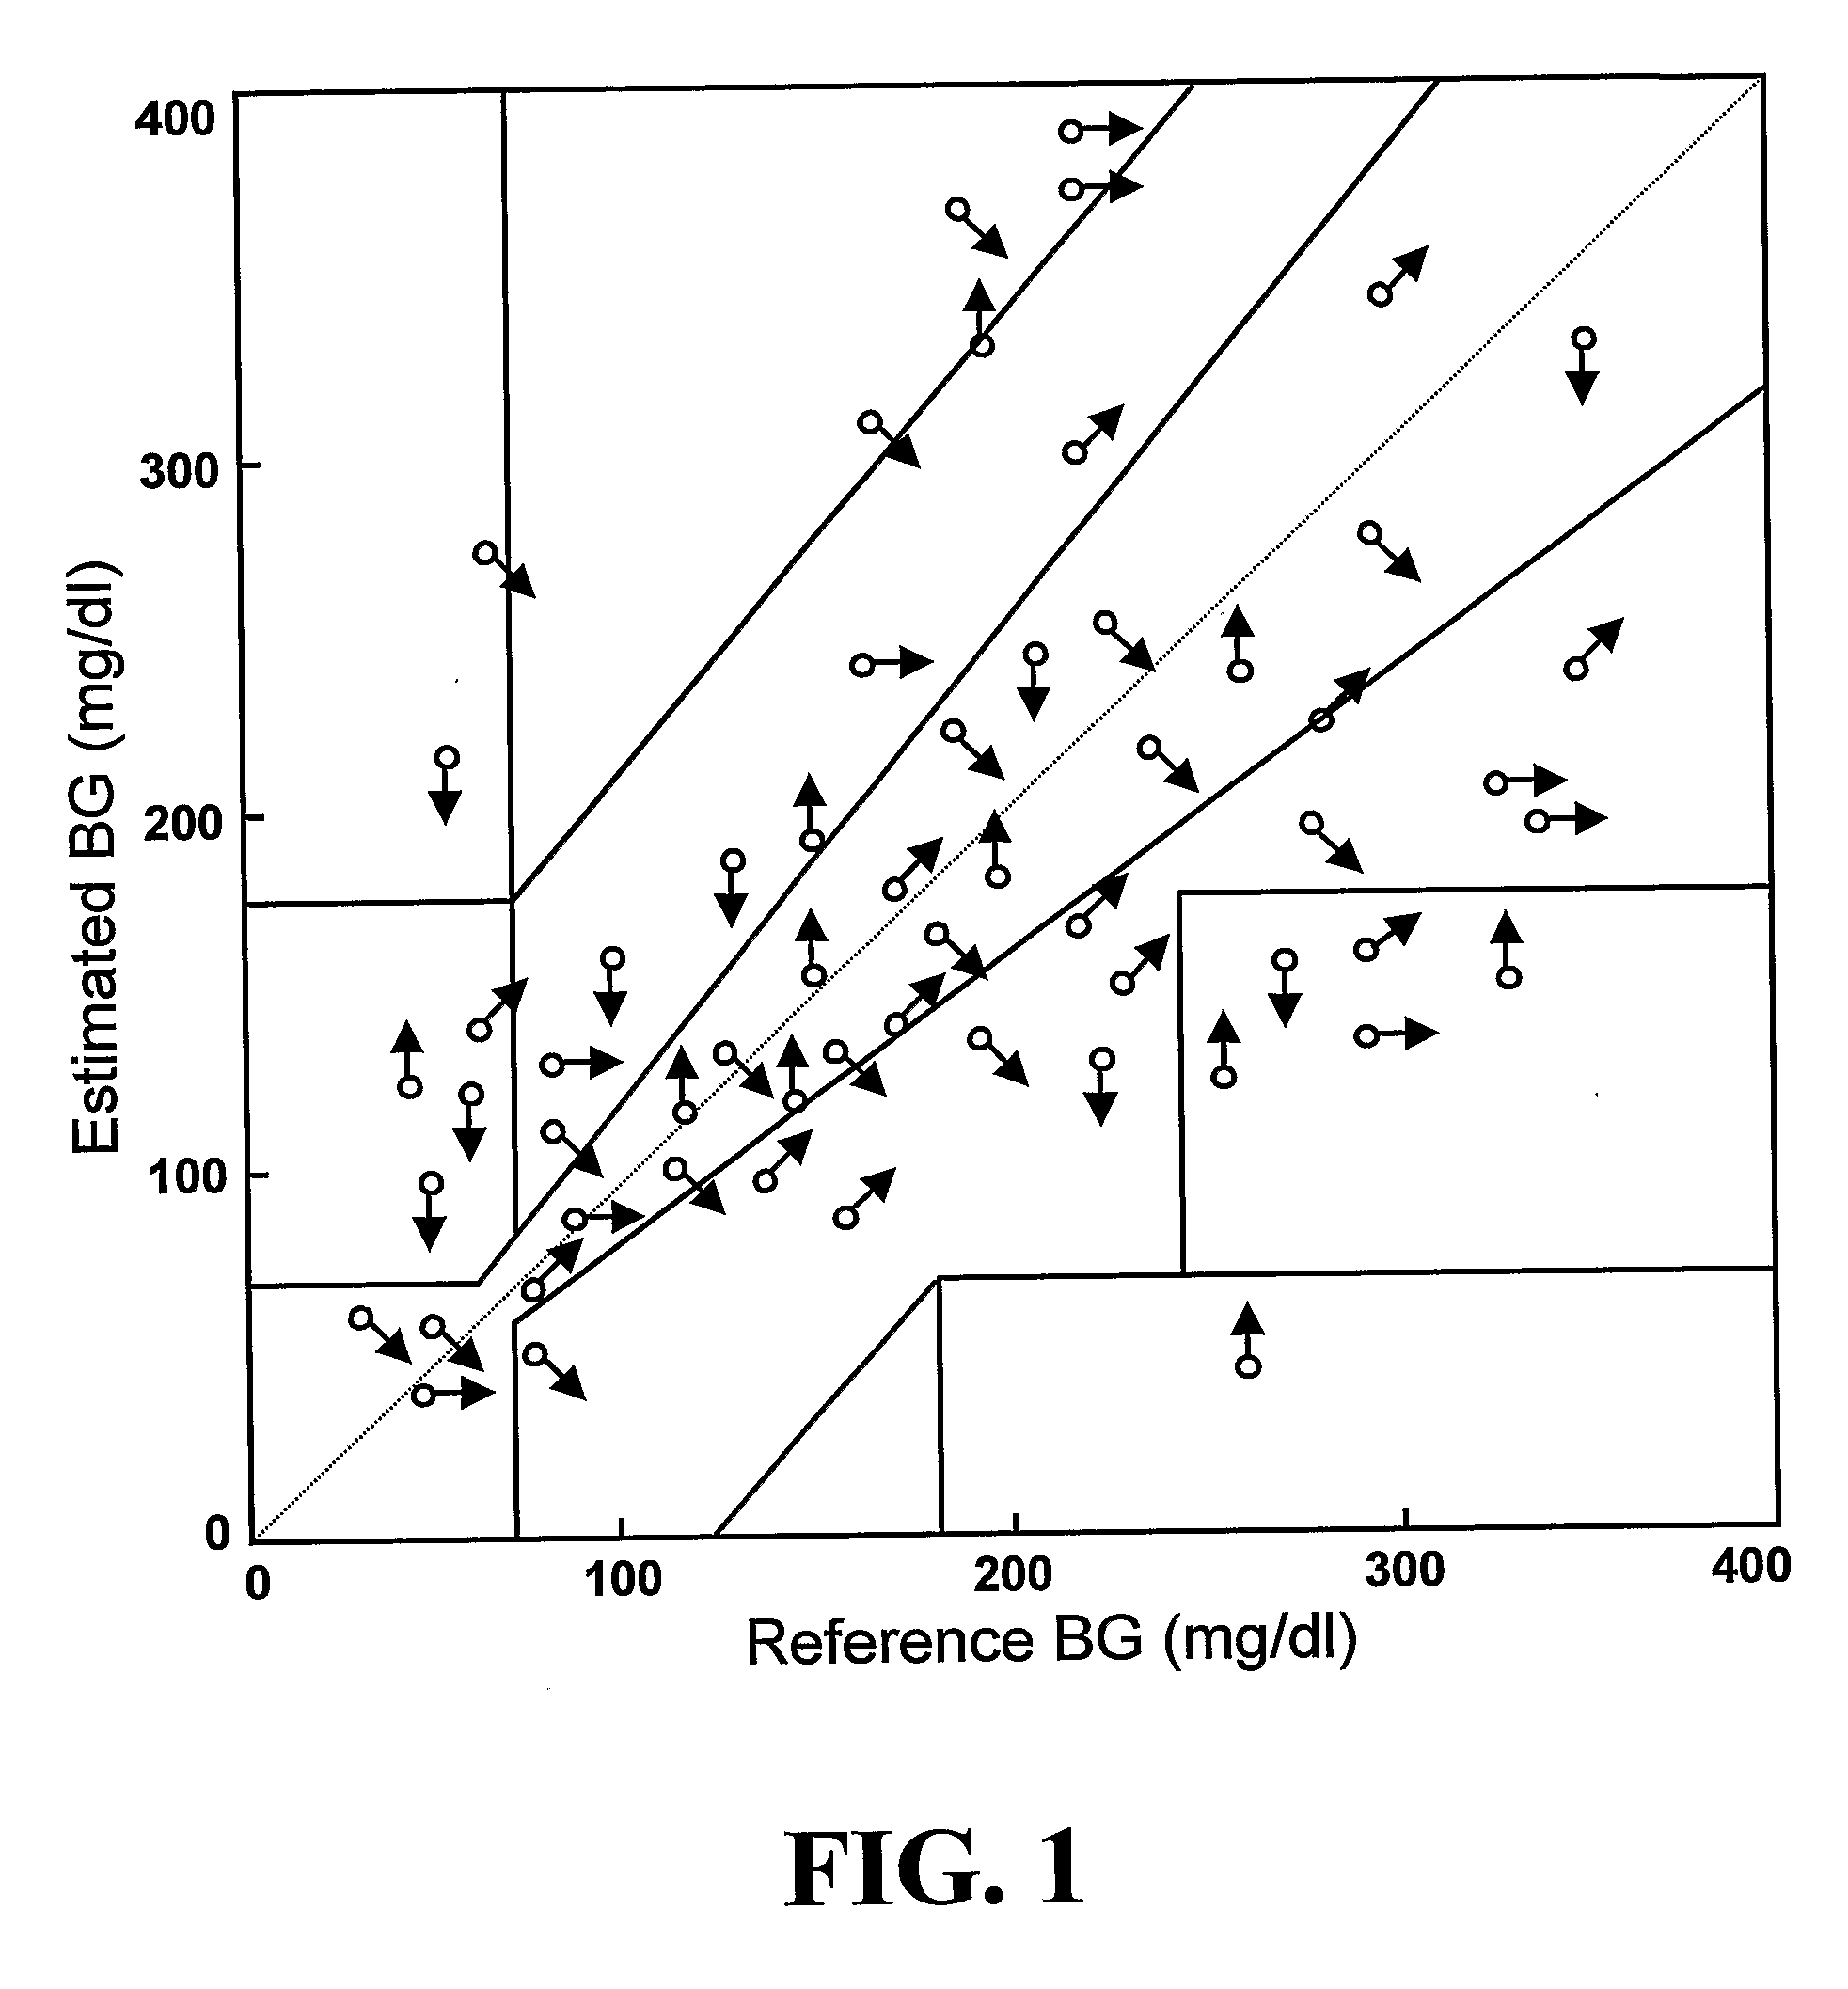 Method, System and Computer Program Product for Evaluating the Accuracy of Blood Glucose Monitoring Sensors/Devices